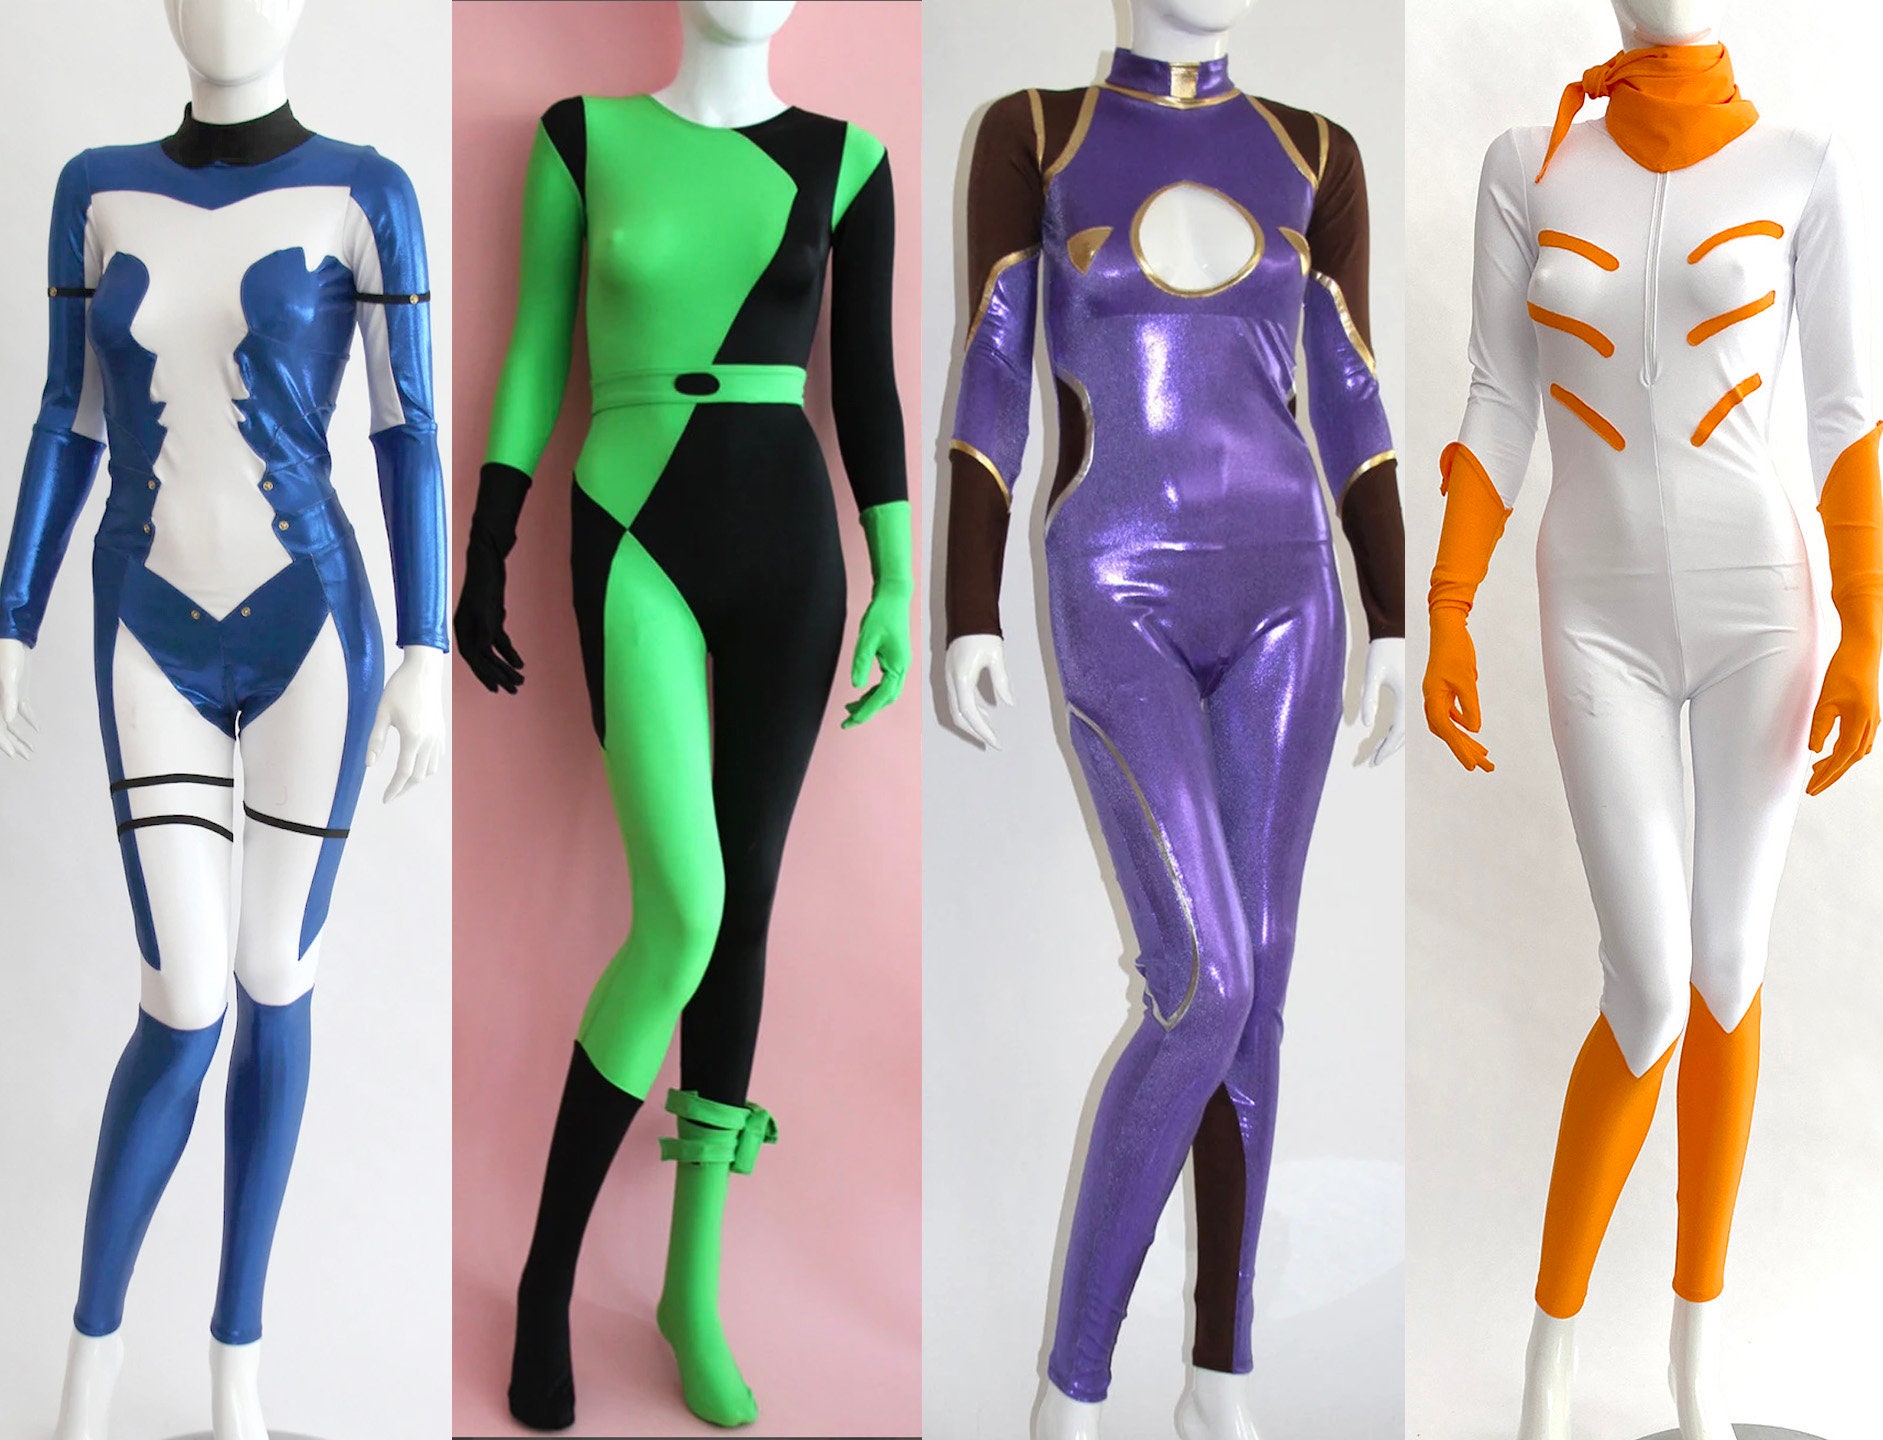 Custom Made Costumes From Pictures for Cosplay Comic Con Halloween Cartoon  X-men Characters Spandex Bodysuits Capes Catsuits Tights 